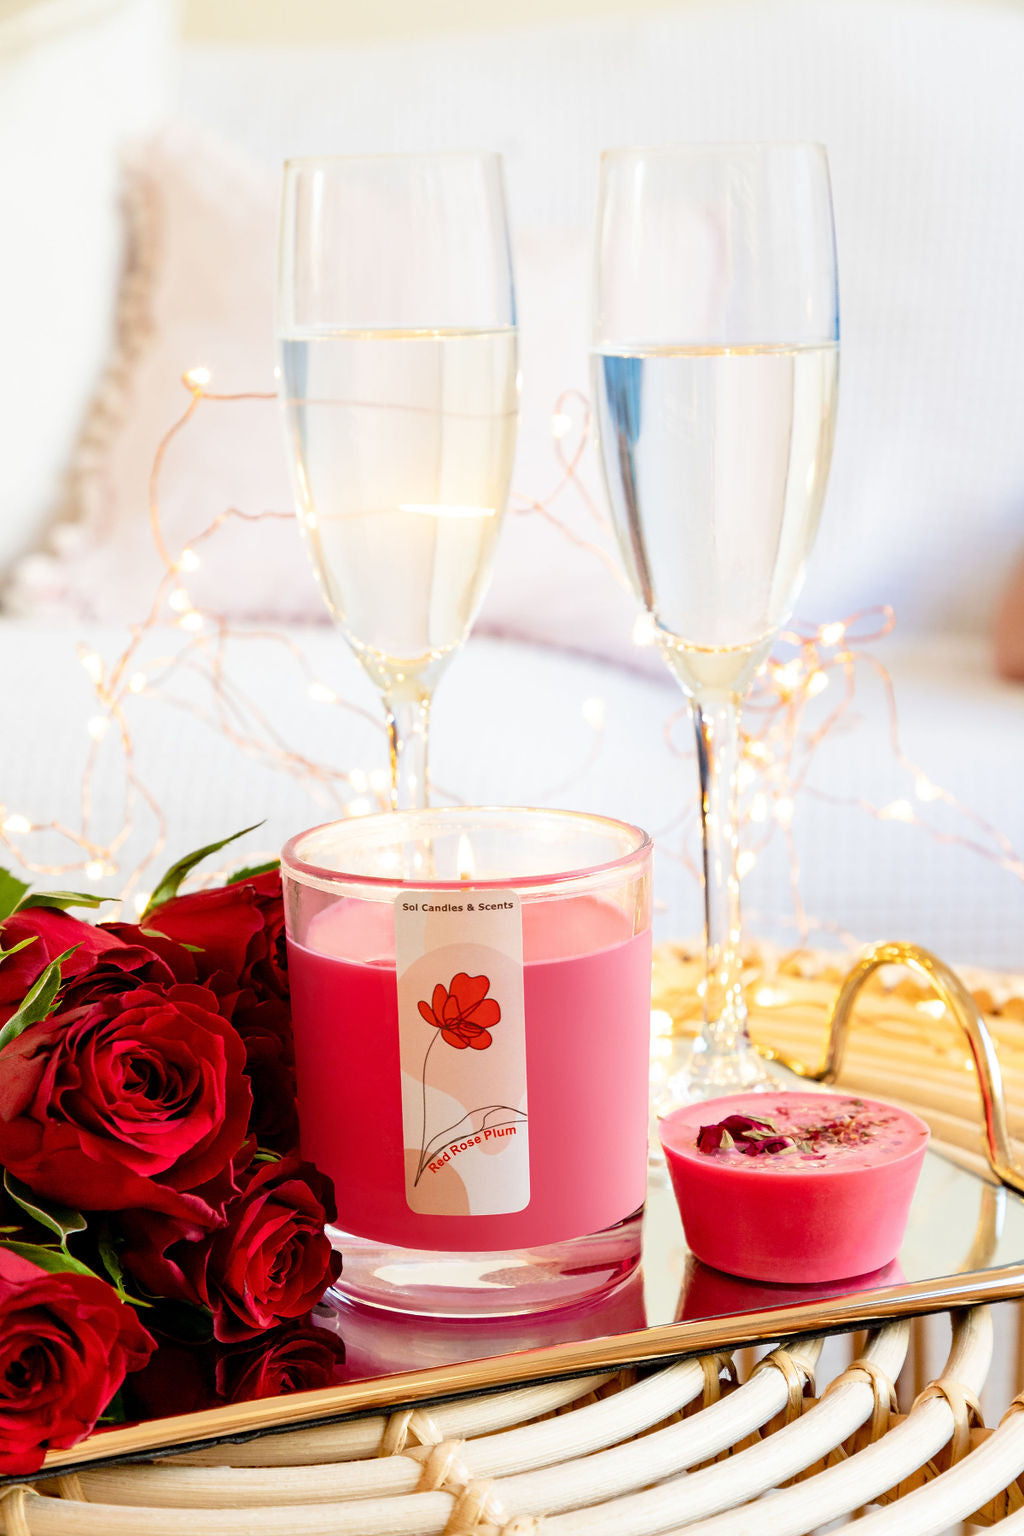 Red Rose & Ruby Plum Candle